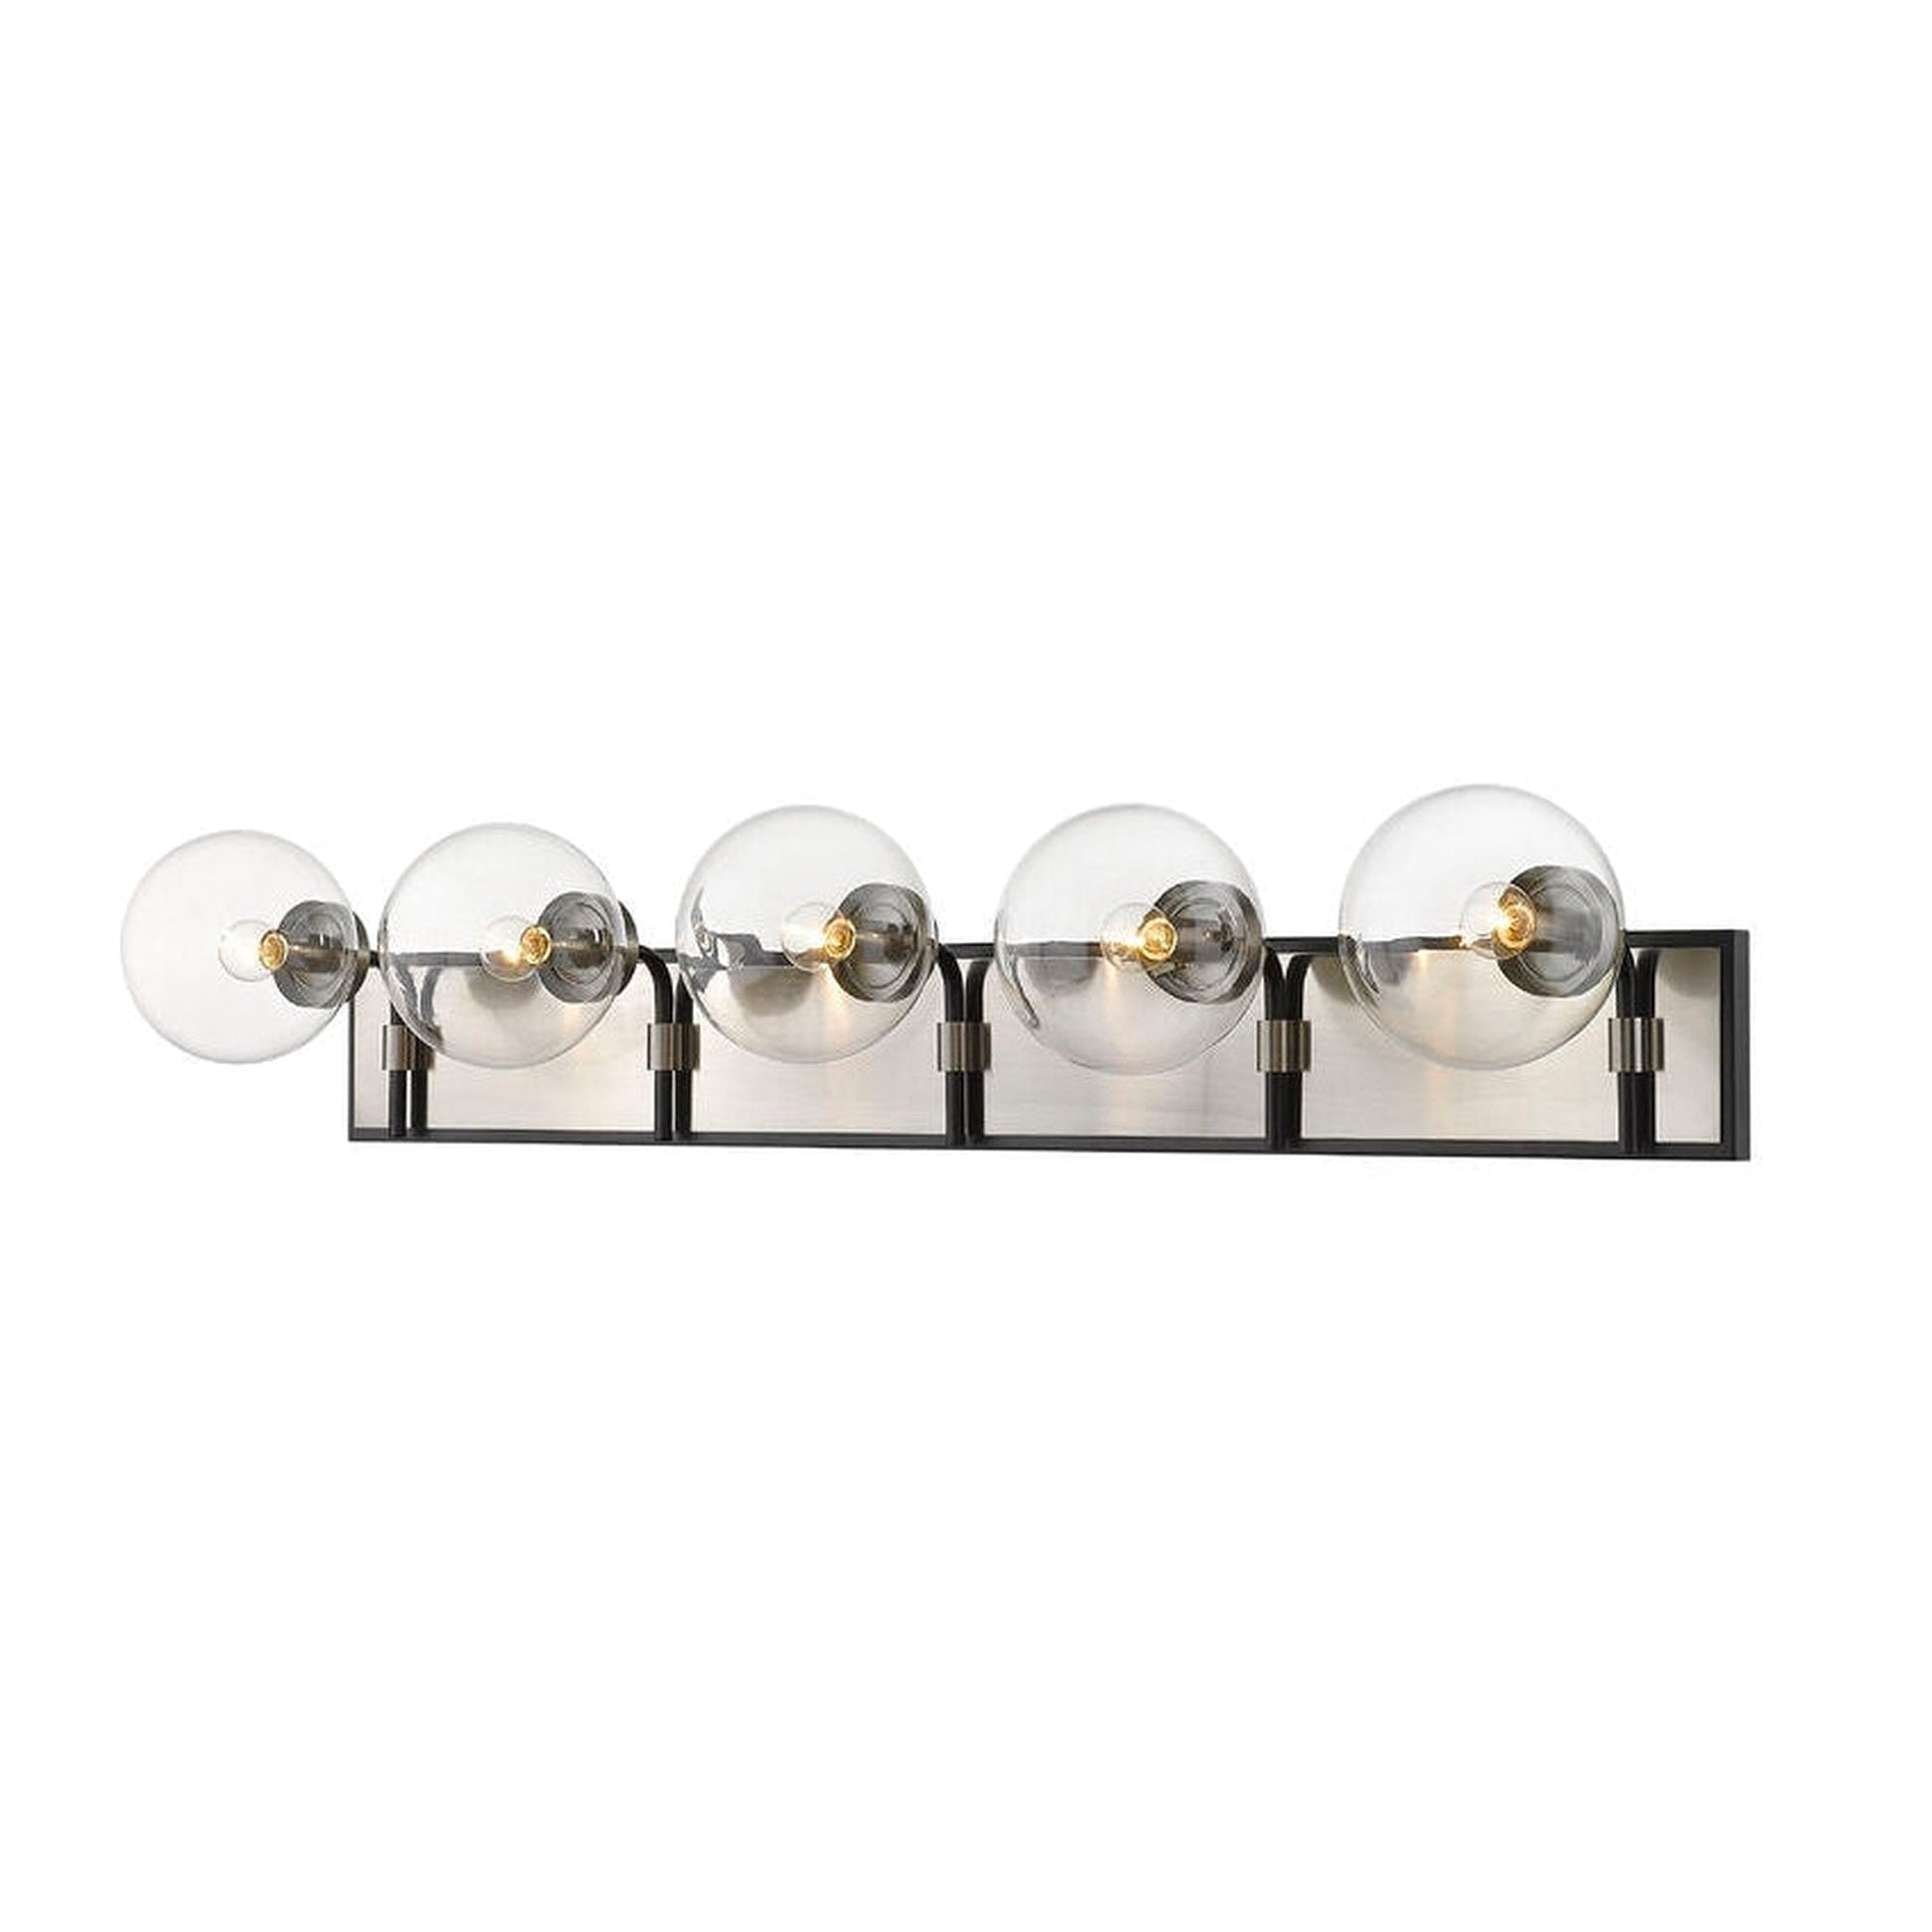 Z-Lite Parsons 42" 5-Light Matte Black and Brushed Nickel Vanity Light With Clear Glass Shade